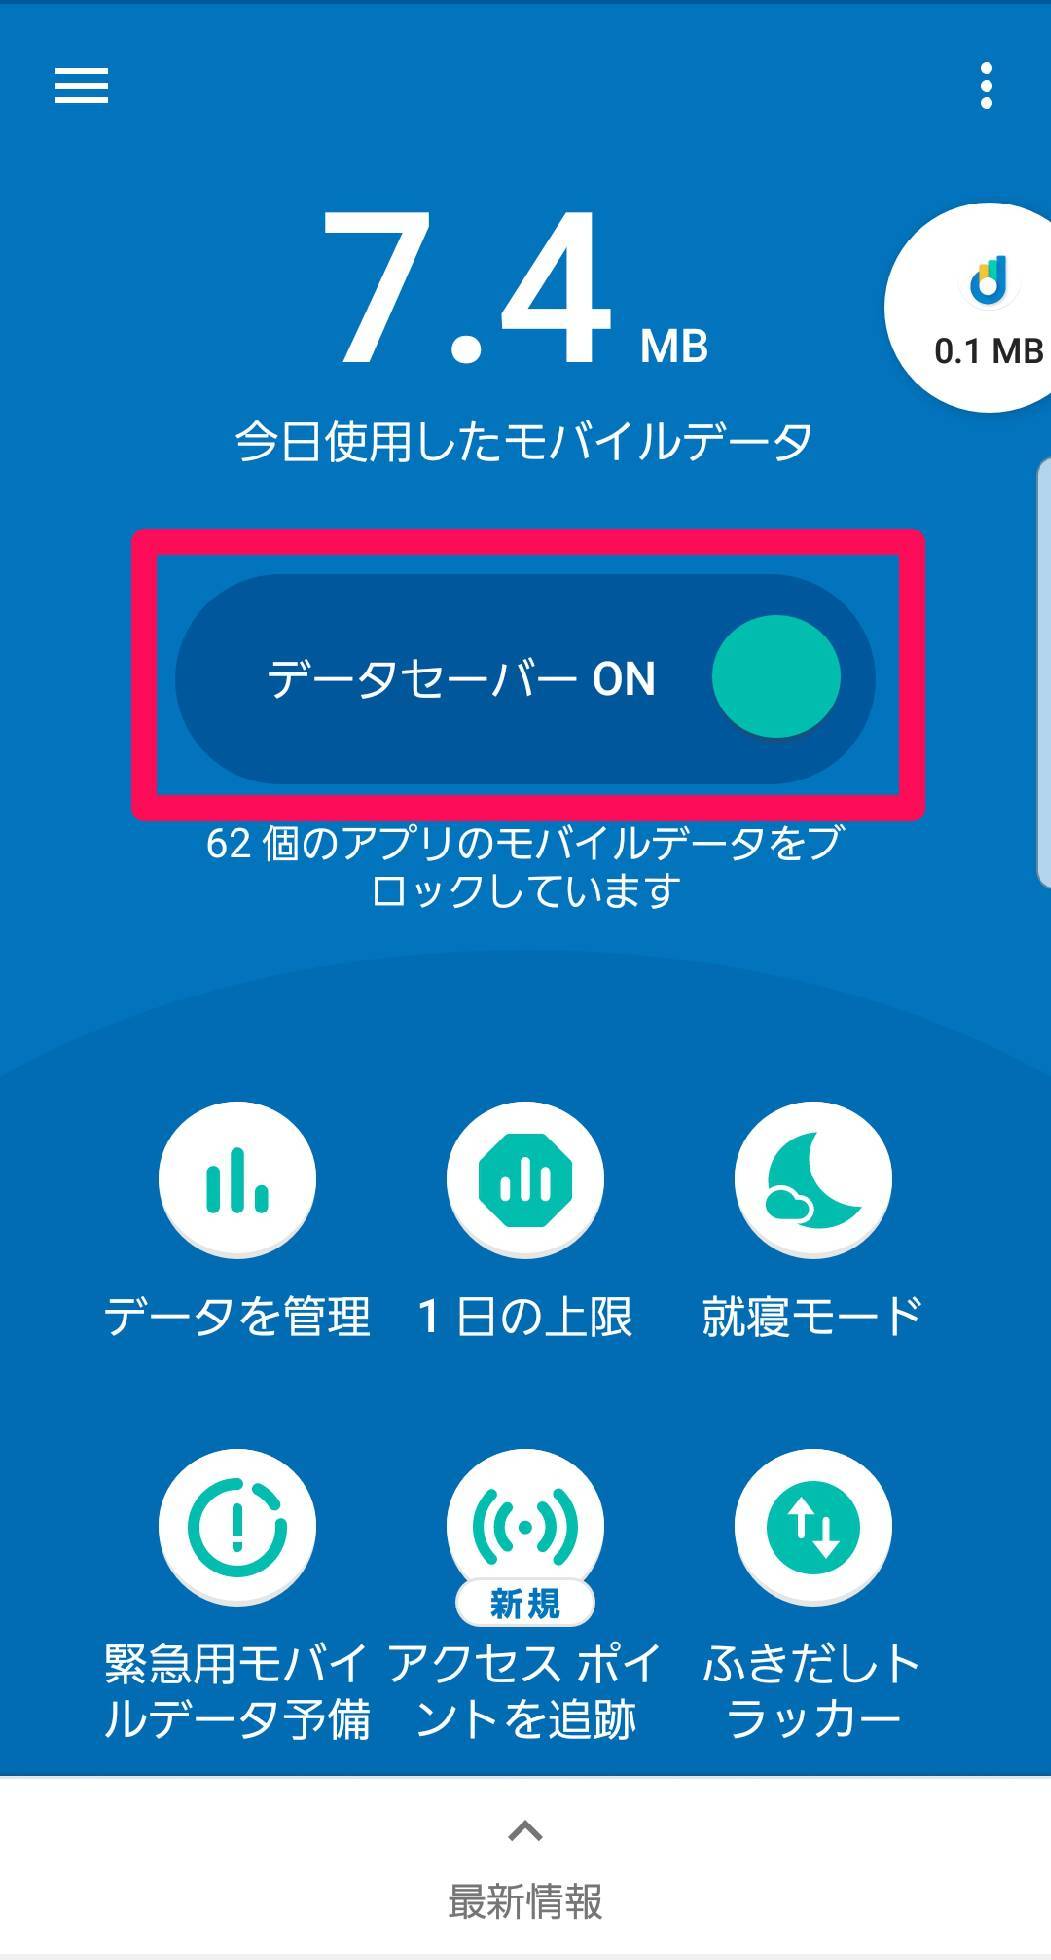 Androidスマホの通信量節約術 ギガ不足を解消するの方法 Appliv Topics